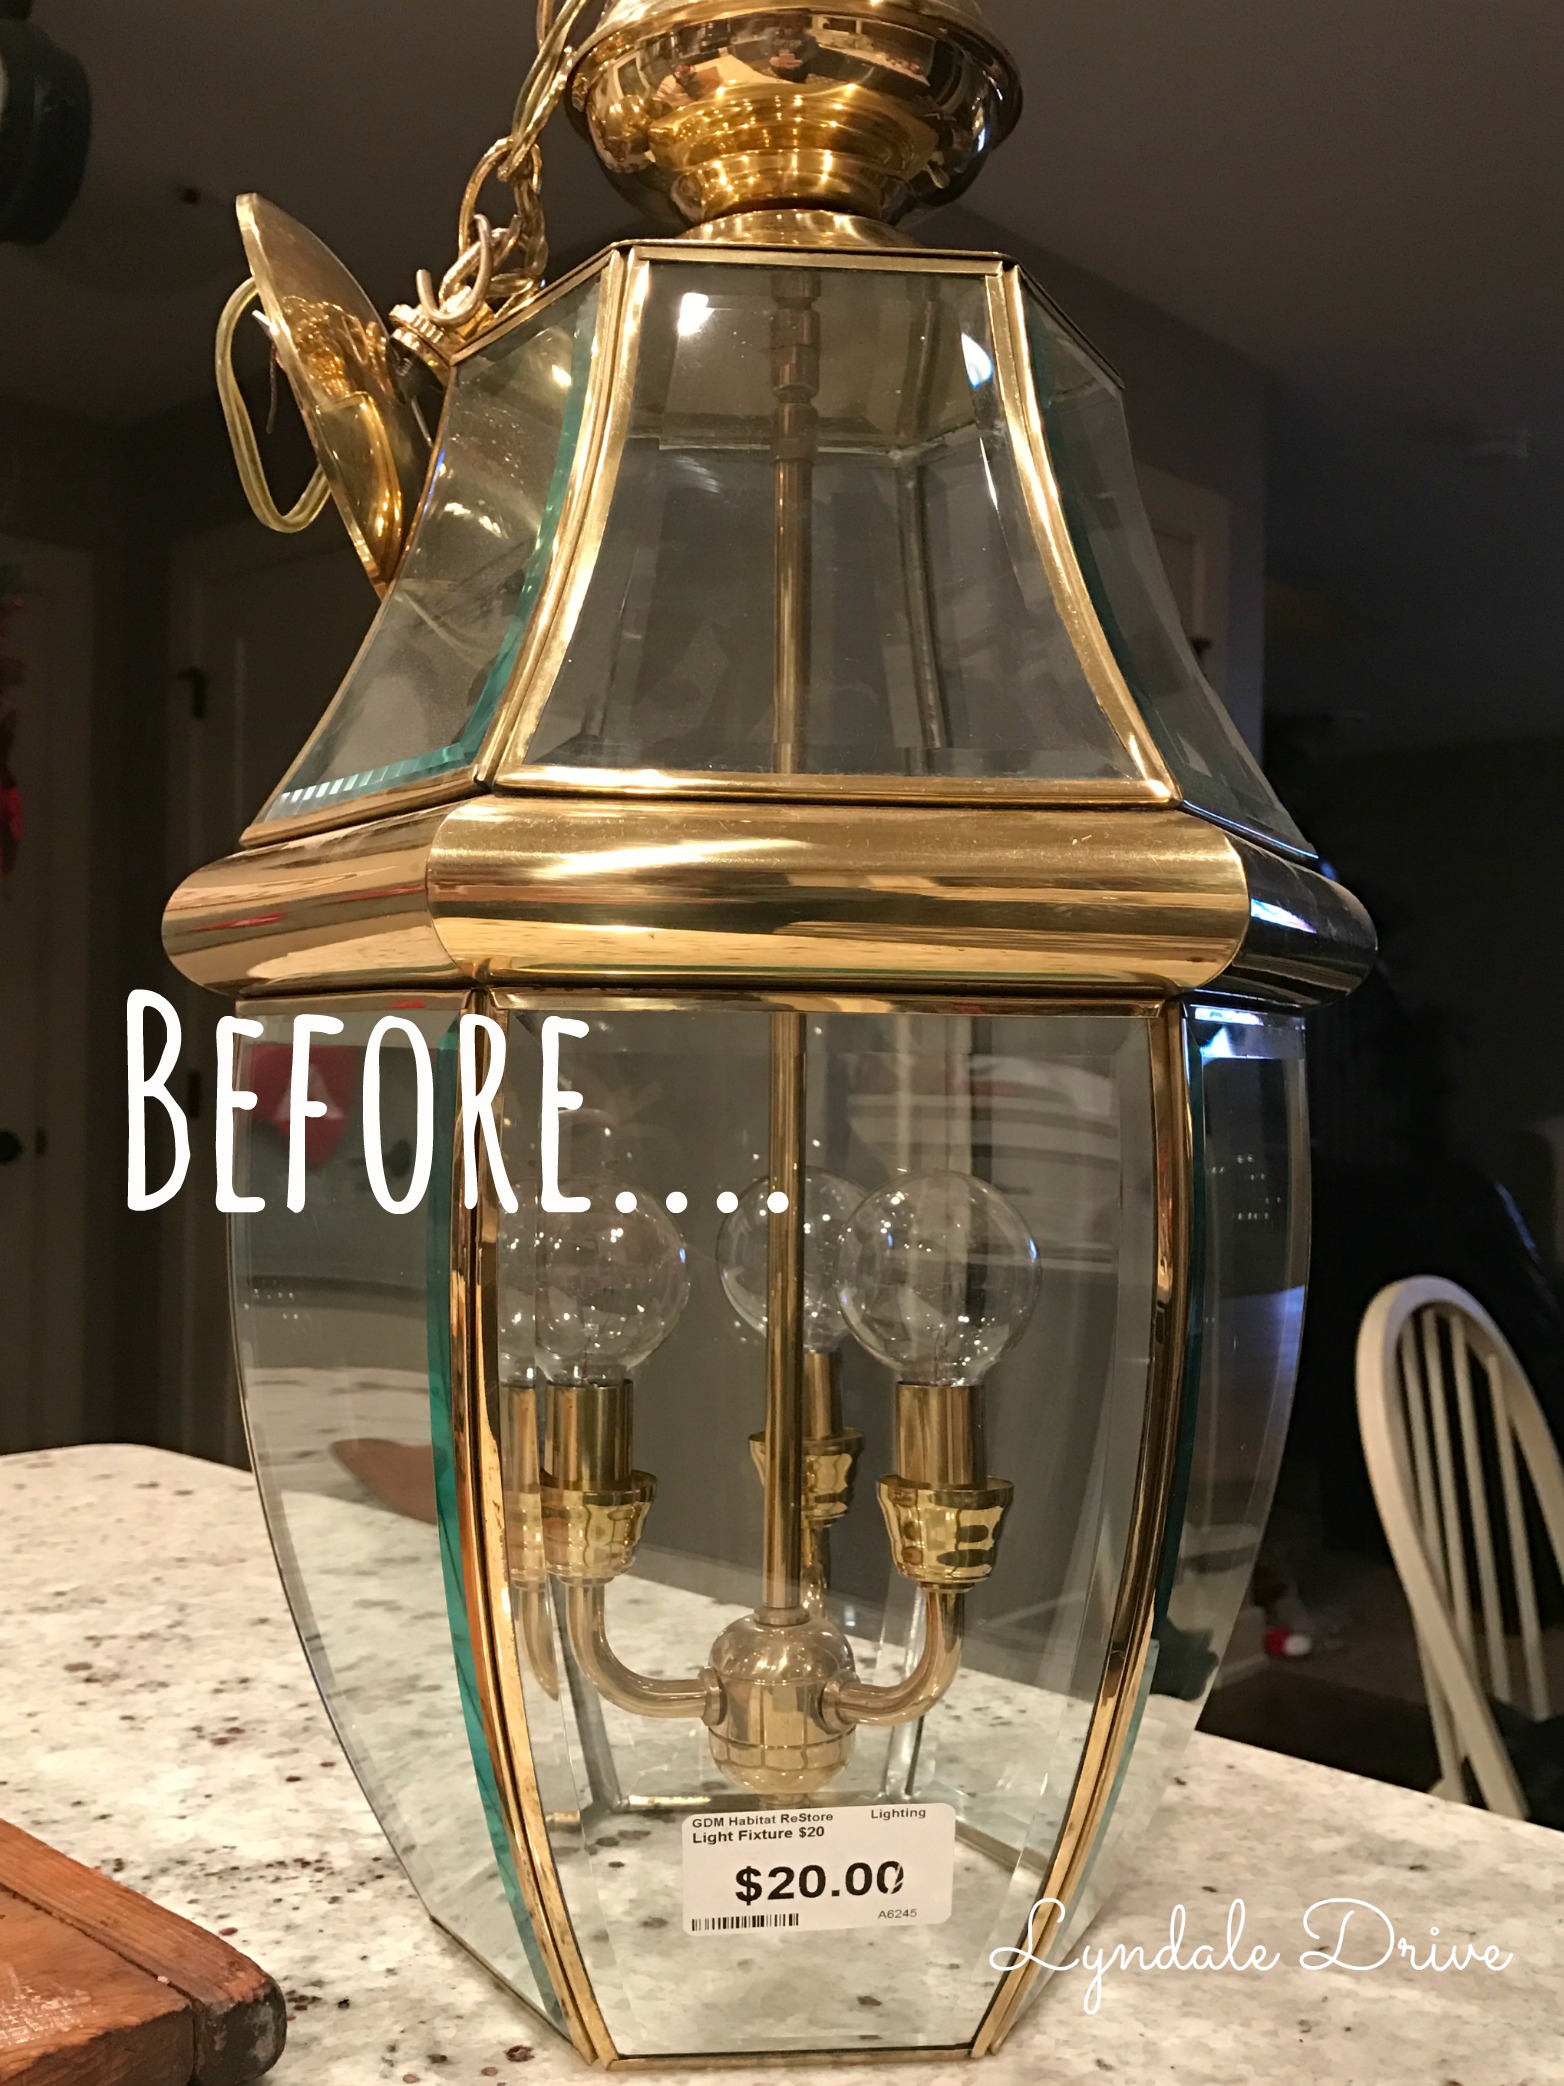 New Life For an Old Brass Fixture